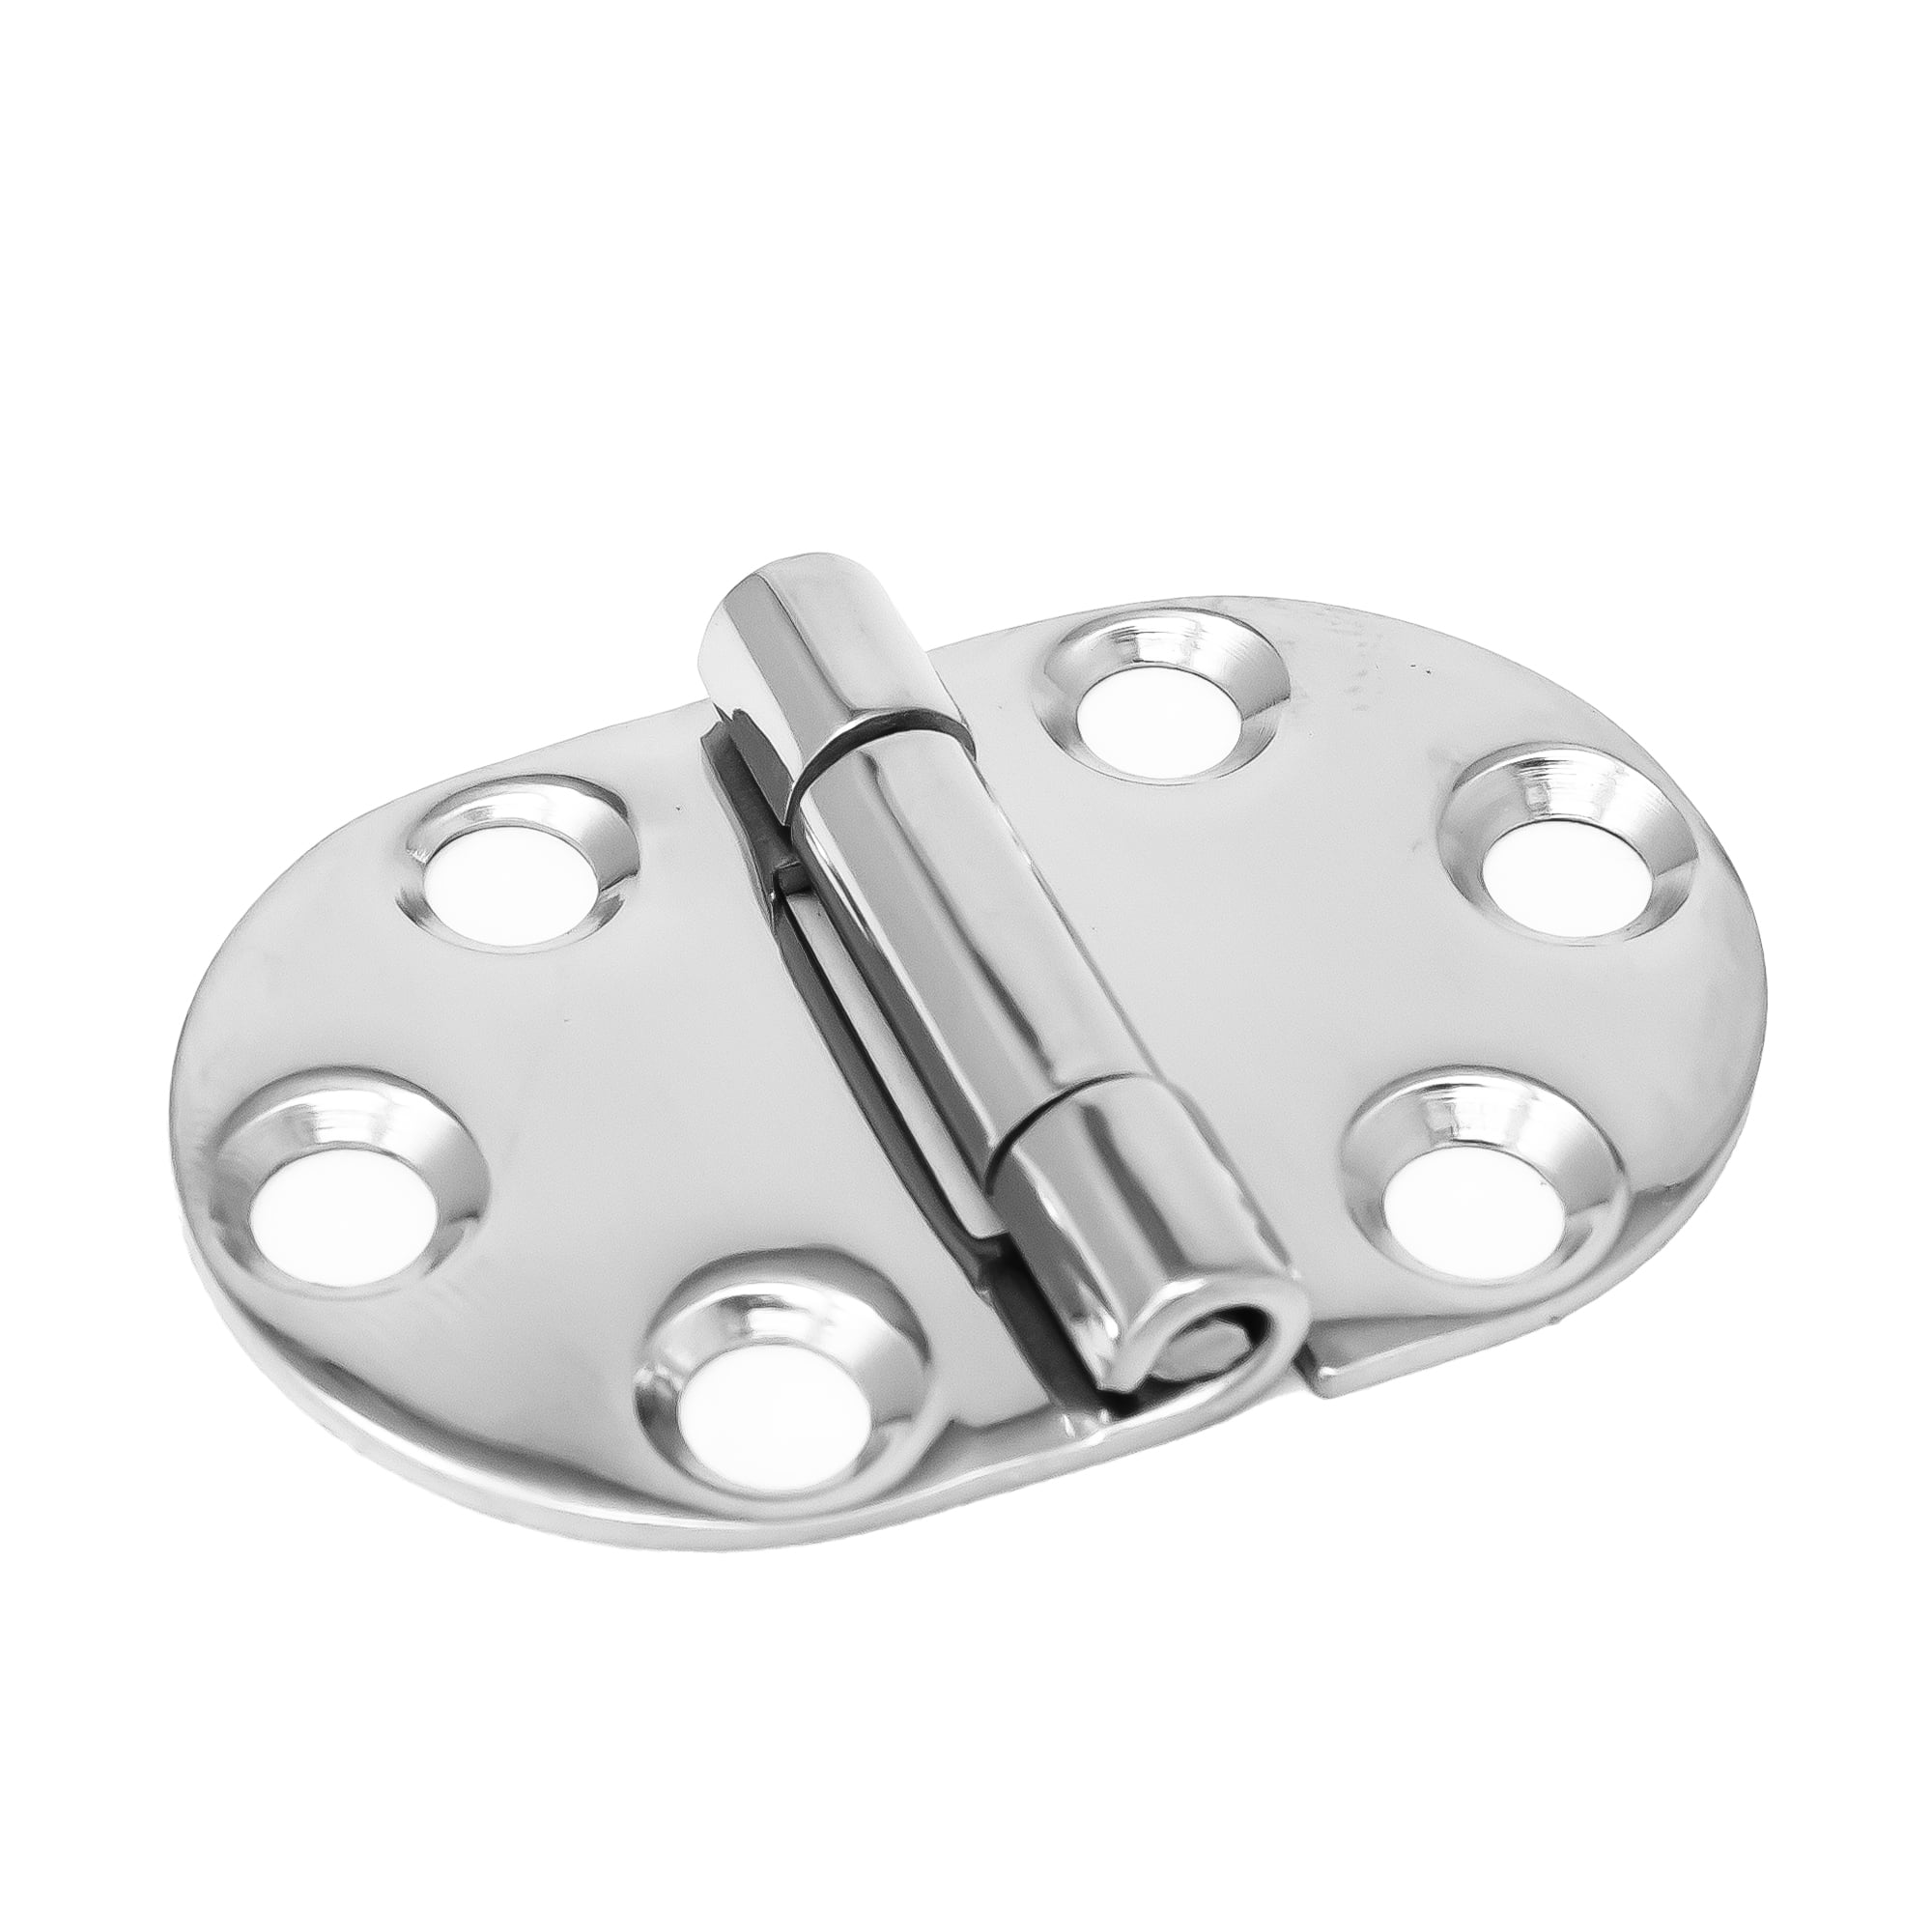 3 Inch Polished Stainless Steel Washered Butt Hinge Pairs for Internal Doors